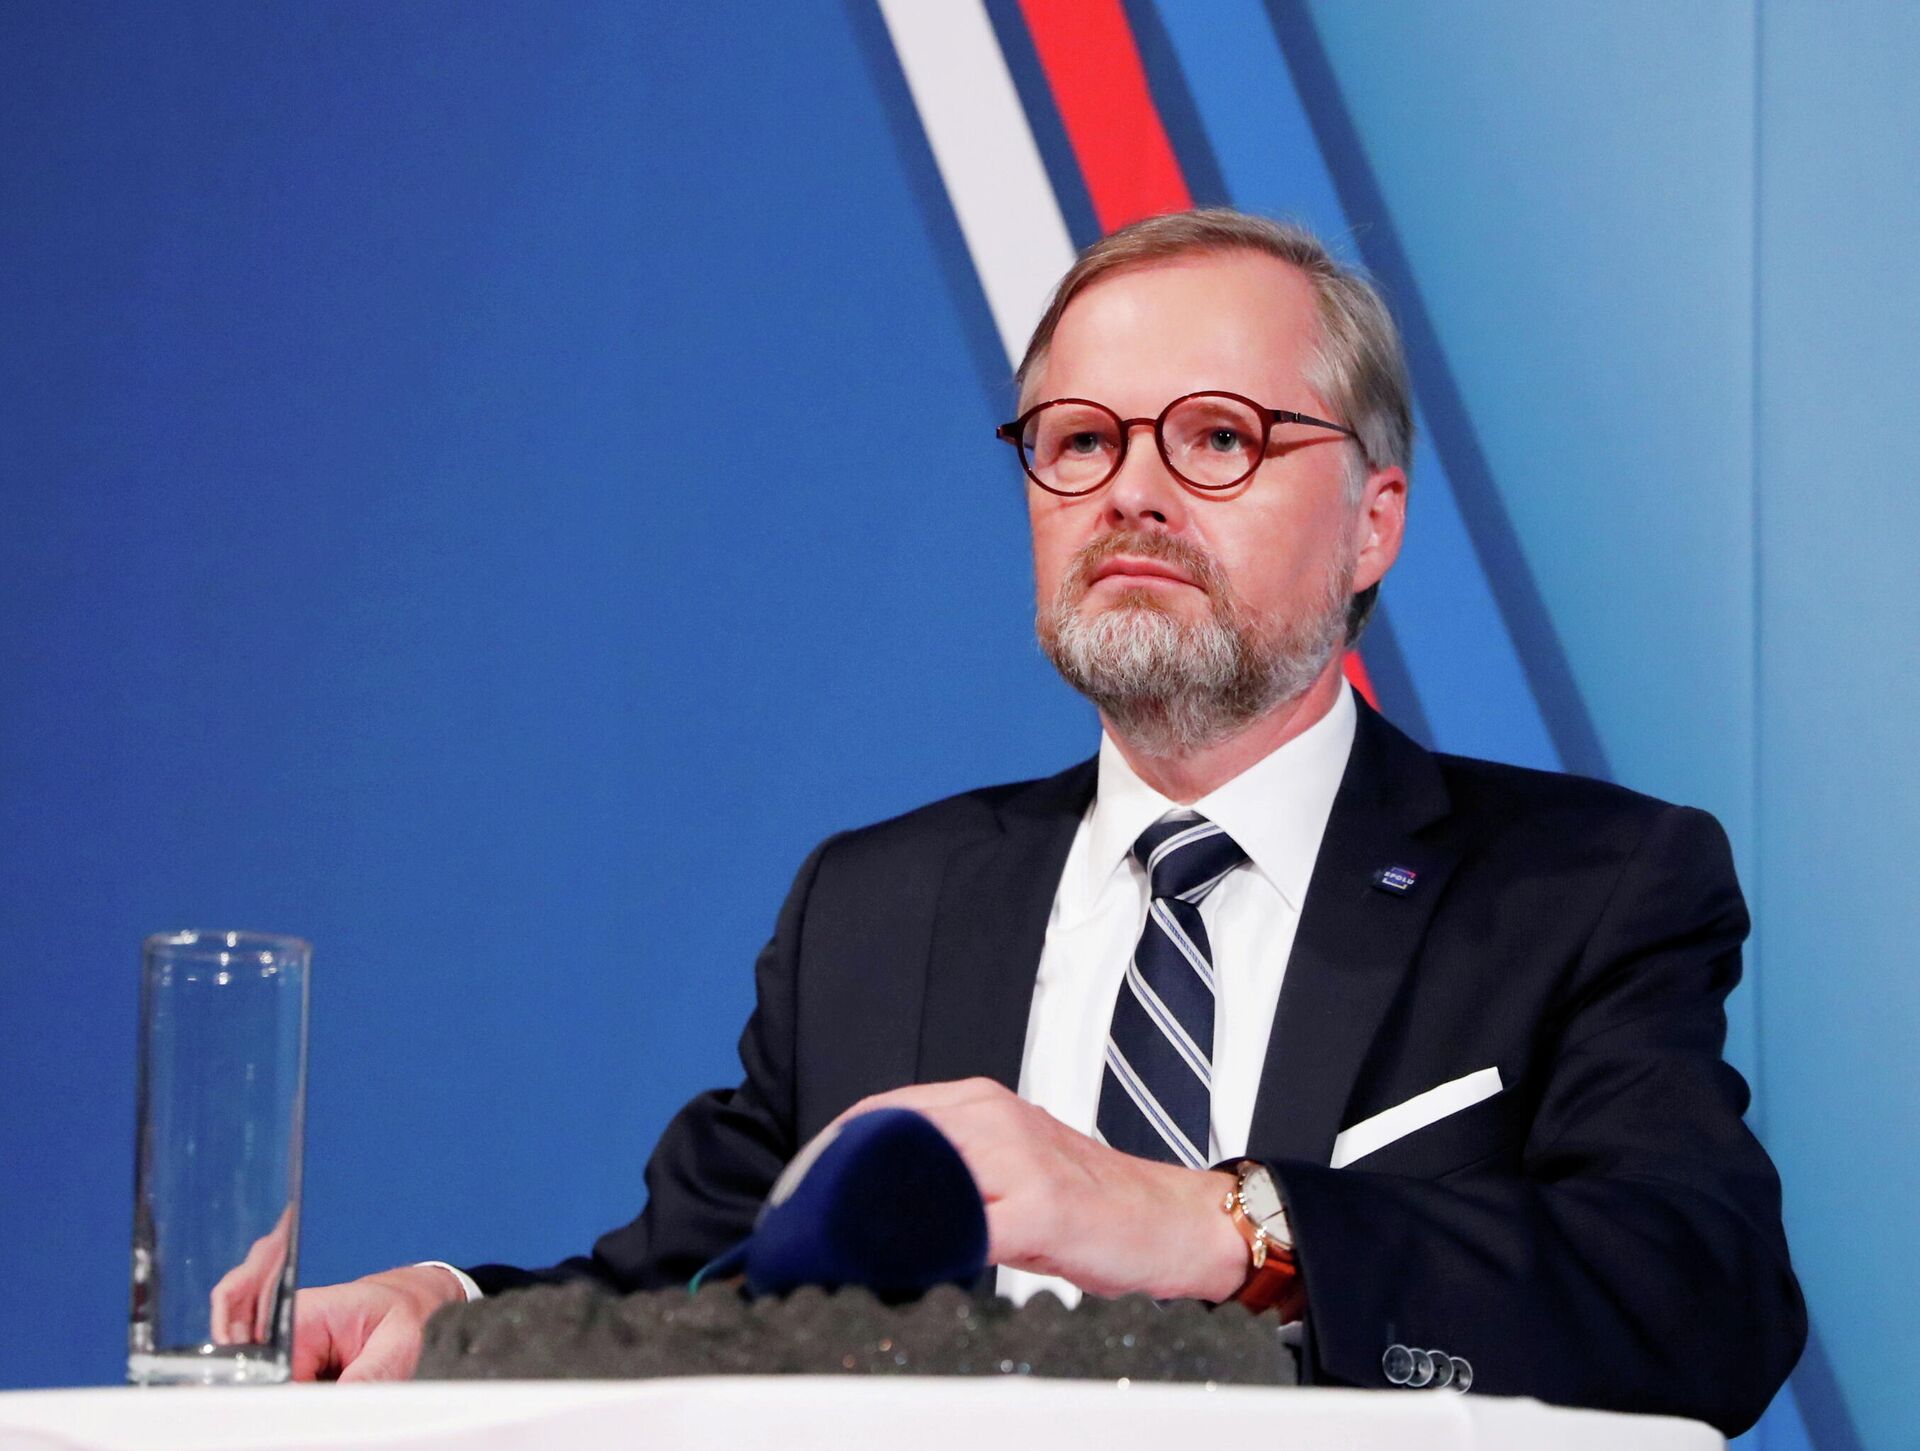 Leader of Civic Democratic Party (ODS) and Together (SPOLU) coalition candidate for prime minister Petr Fiala attends the last radio debate before the country's parliamentary election in Prague, Czech Republic, 8 October 2021. - Sputnik International, 1920, 11.11.2021